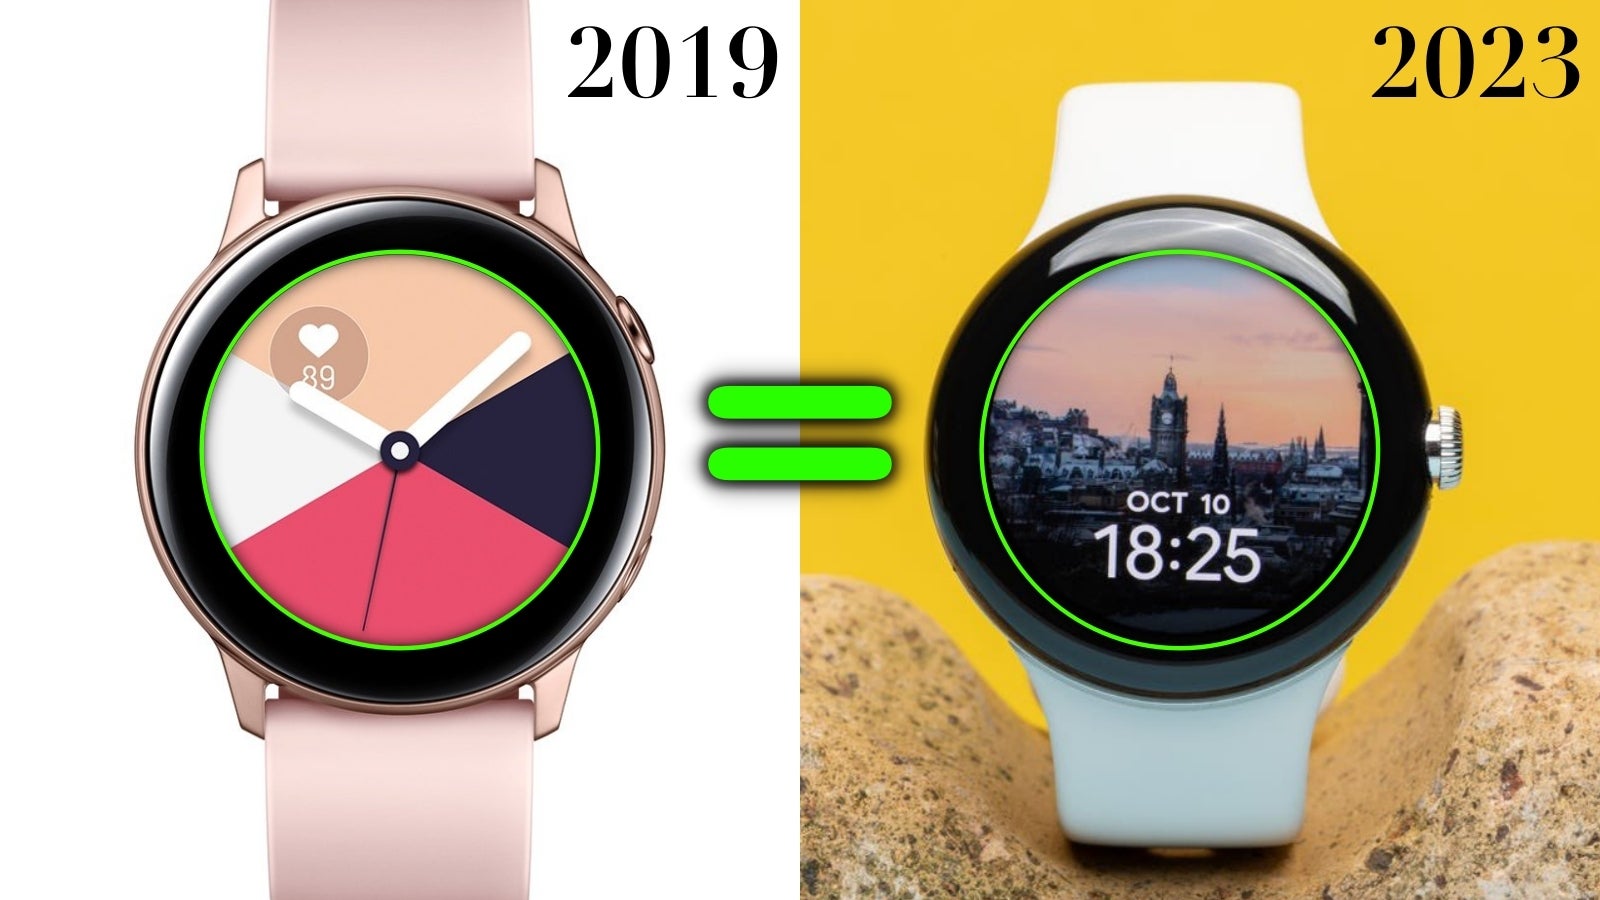 My 2023 Pixel Watch 2 has the same bezel size as the 2019 Galaxy Watch Active, and that's... not cool.  - Pixel Watch 3: Google wants me to “transition” into the person (smartwatch) I refuse to be!